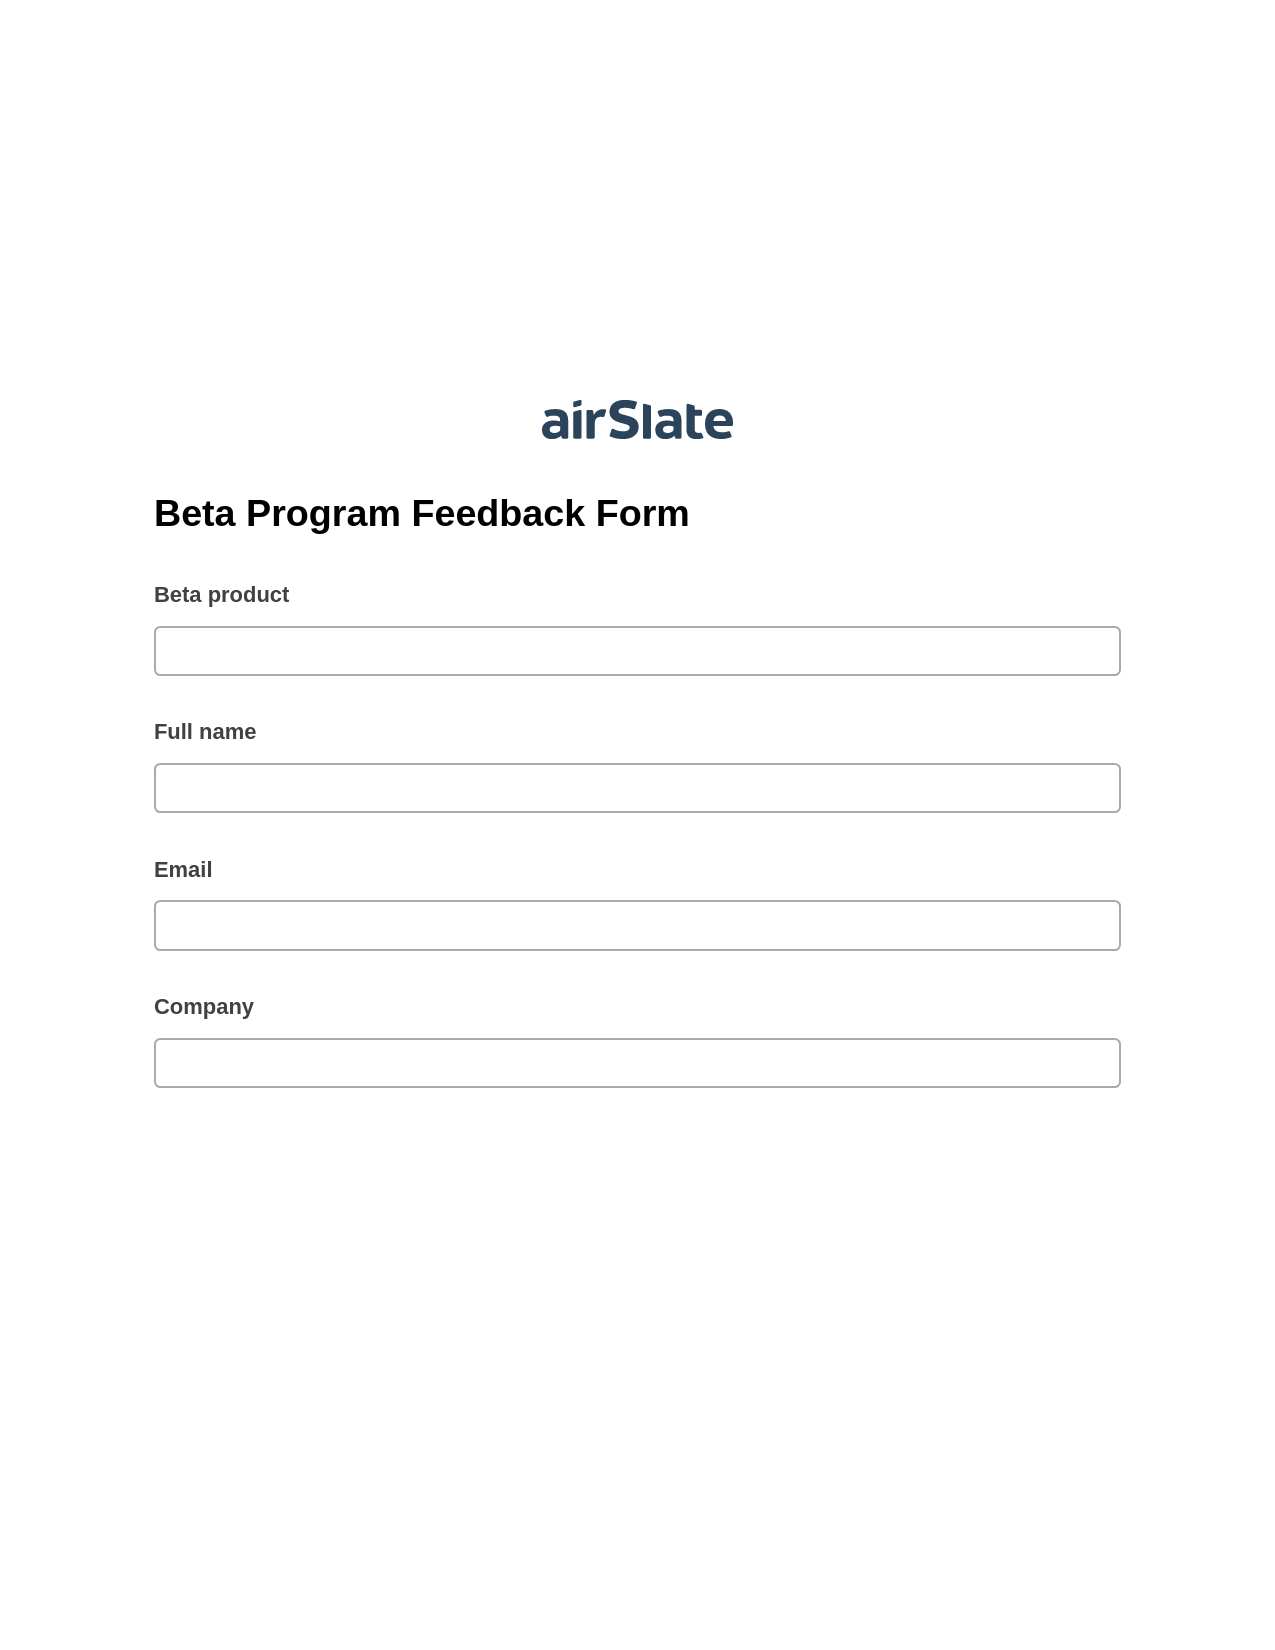 Multirole Beta Program Feedback Form Pre-fill from CSV File Bot, Remove Tags From Slate Bot, Box Bot